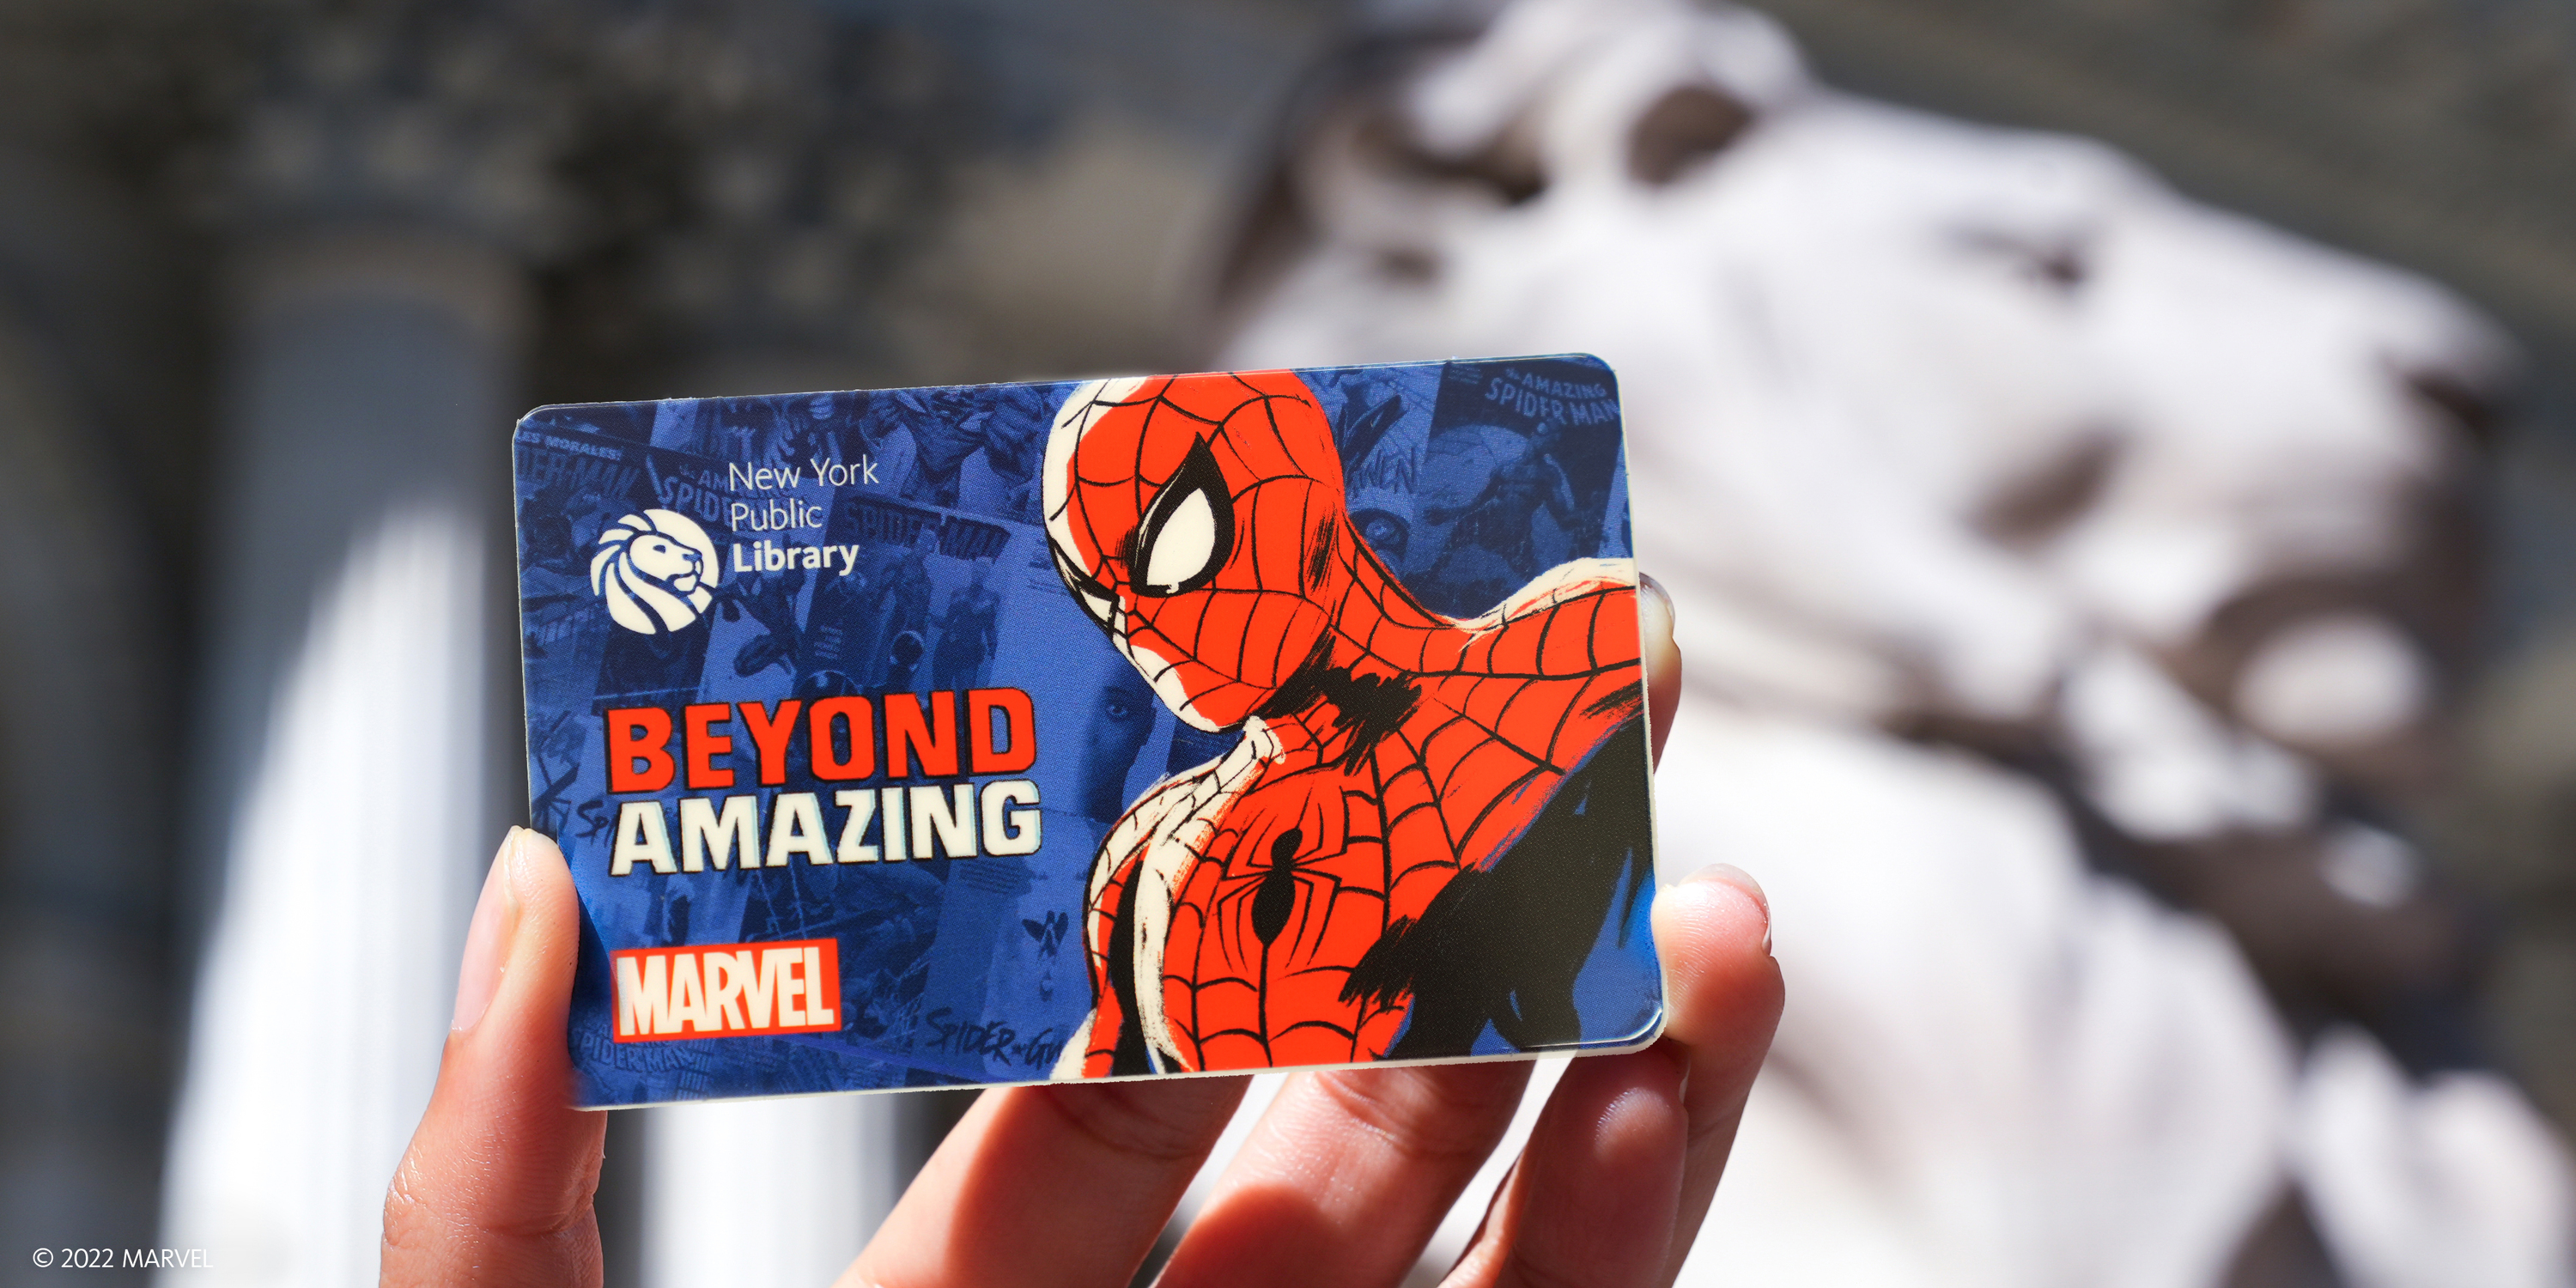 The New York Public Library is releasing a special edition Spider-Man  library card